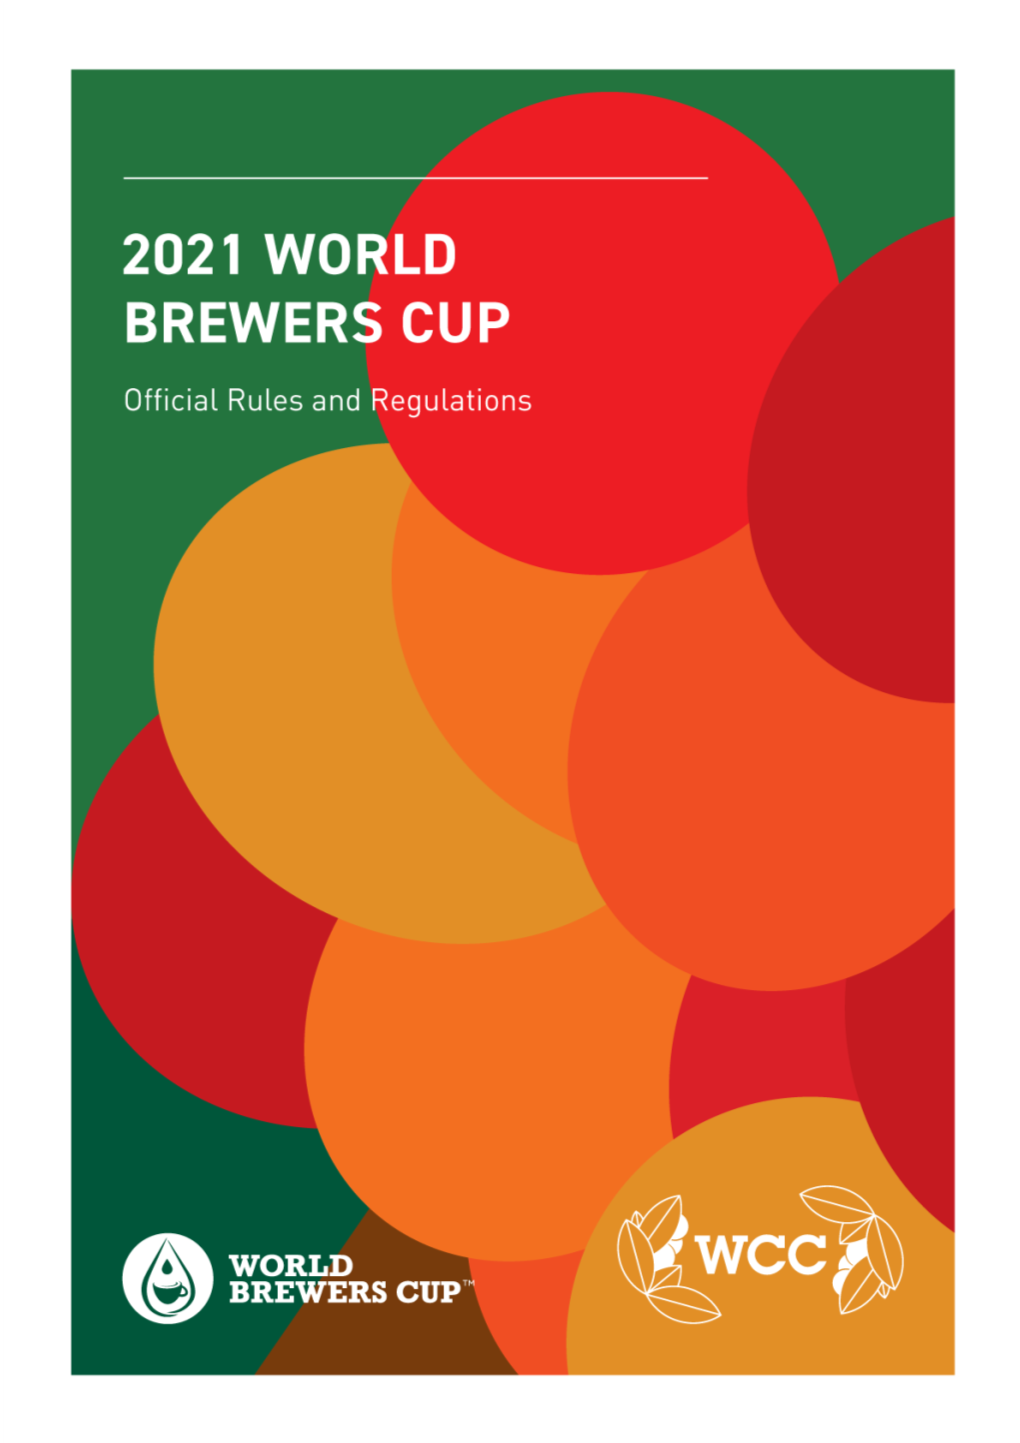 2021 World Brewers Cup Rules and Regulations